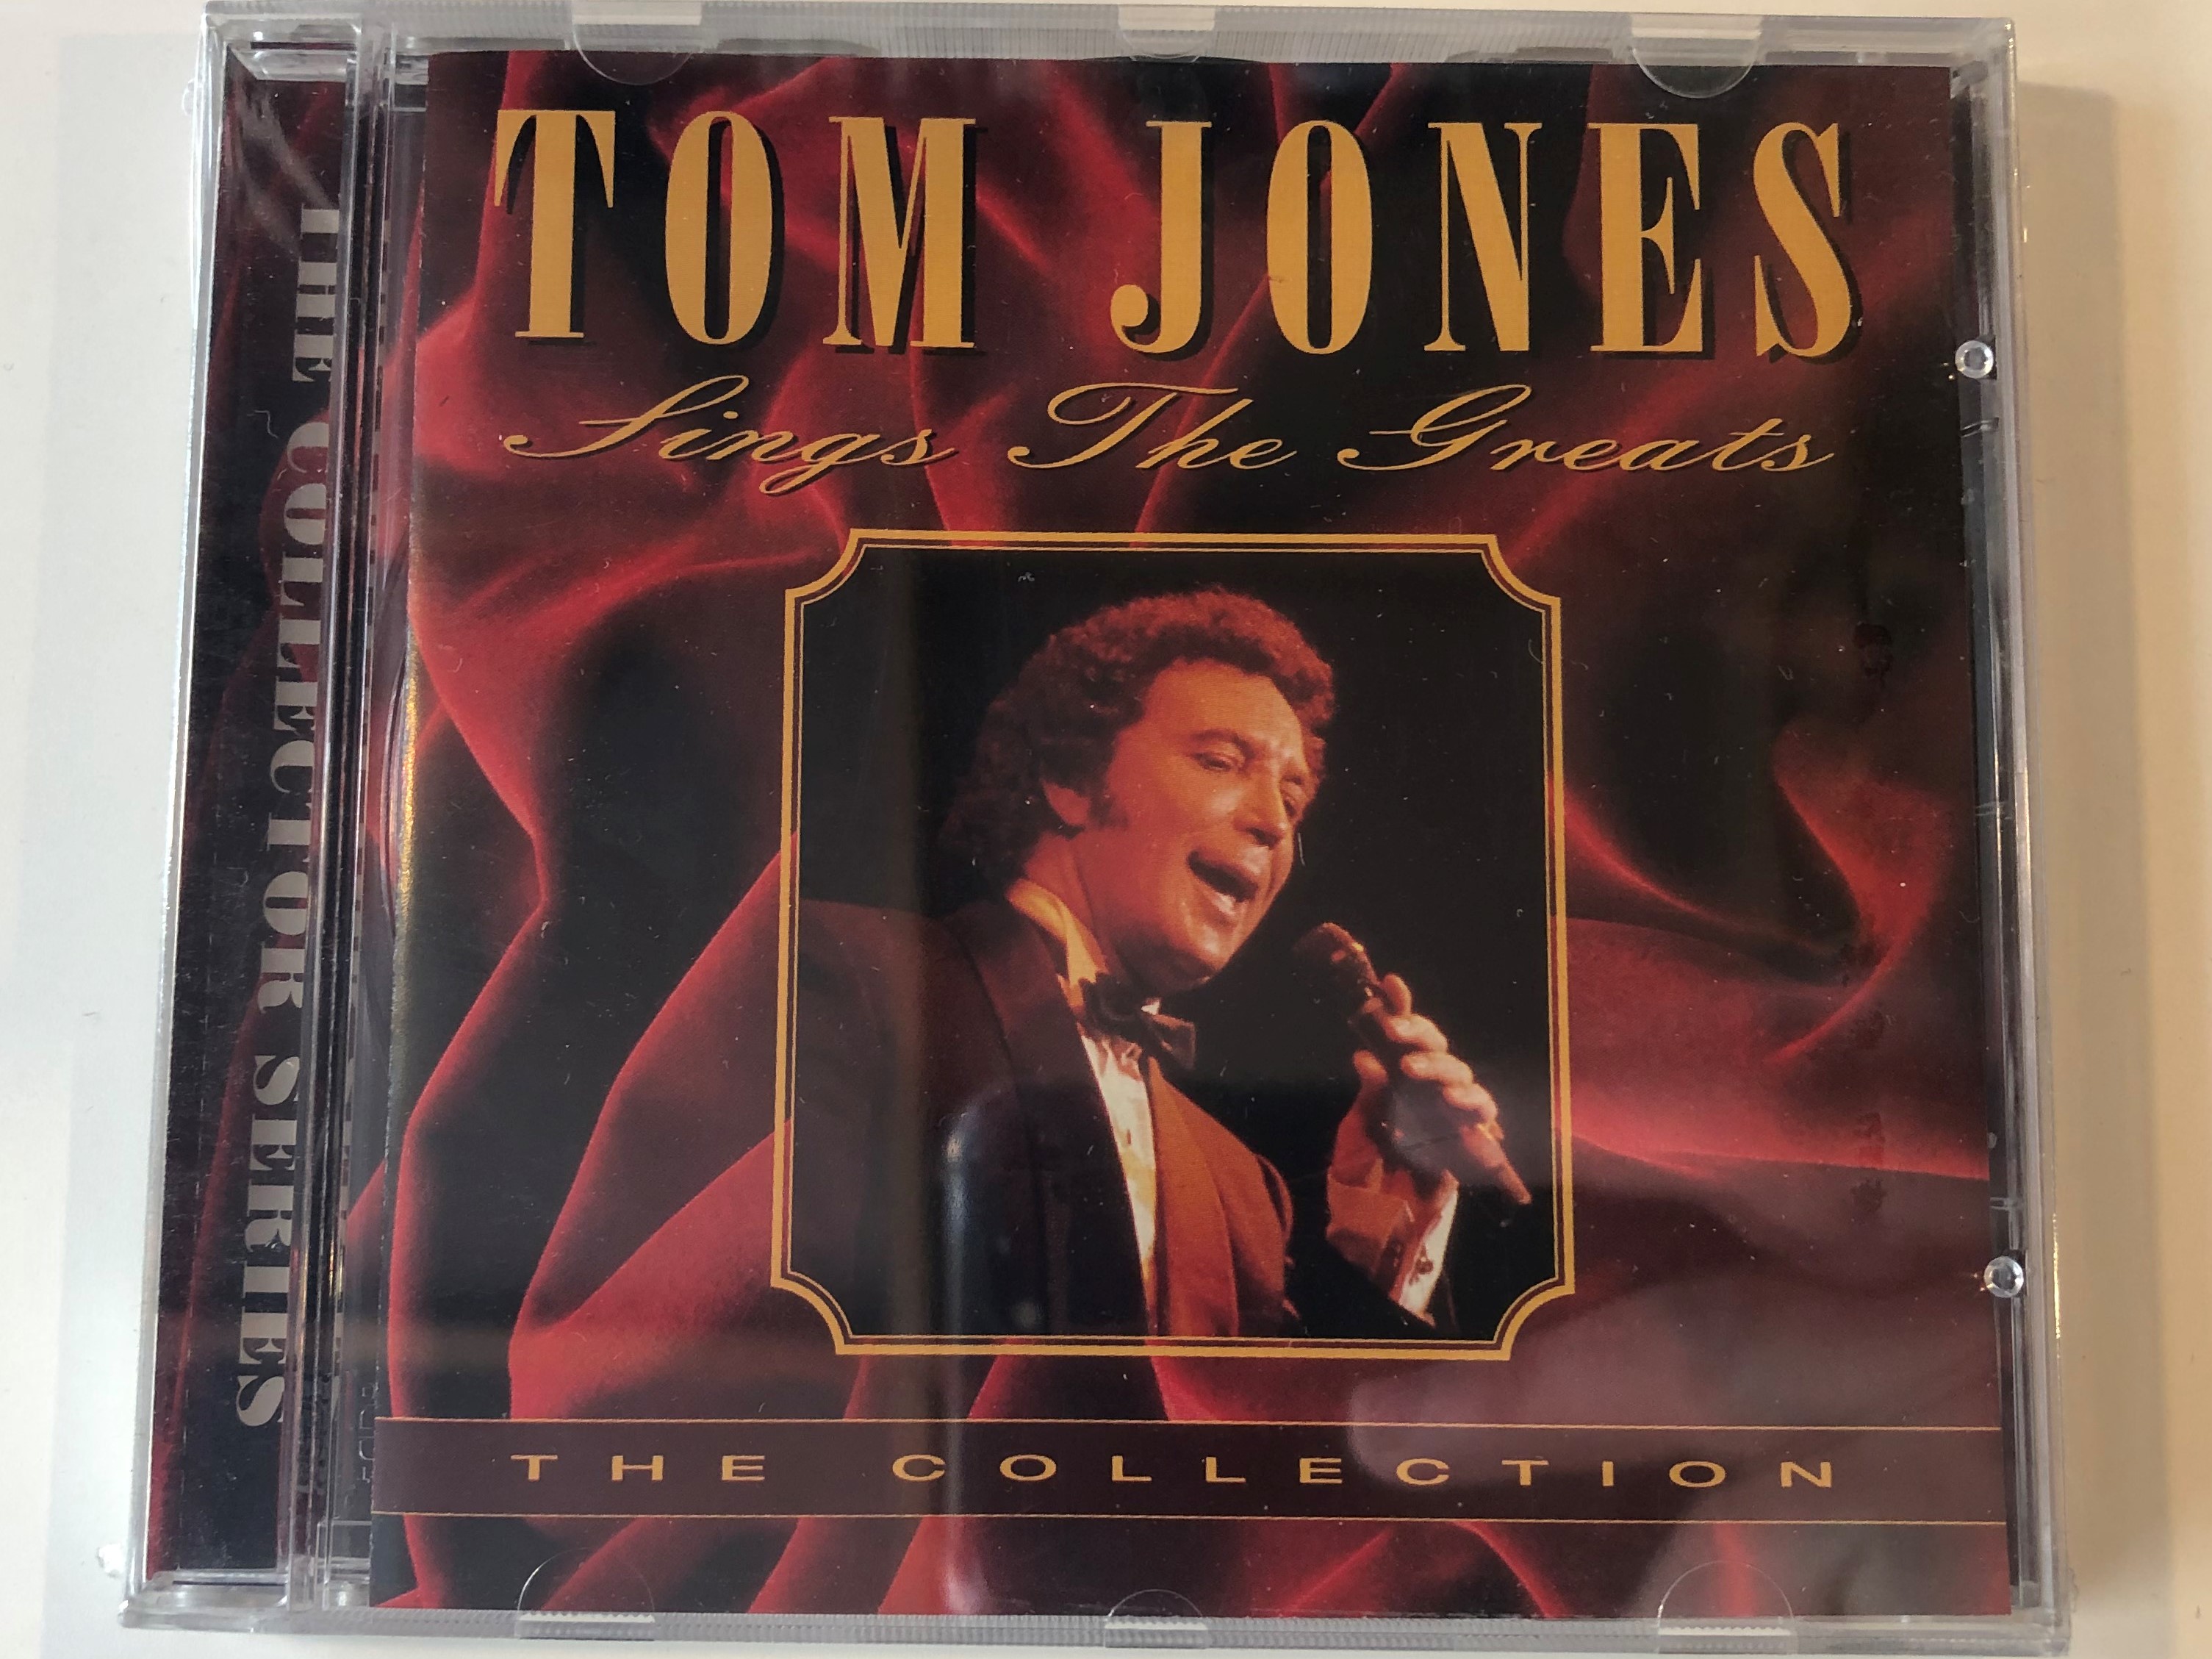 tom-jones-sings-the-greats-the-collection-castle-communications-plc-audio-cd-1995-ccs-cd-431-1-.jpg